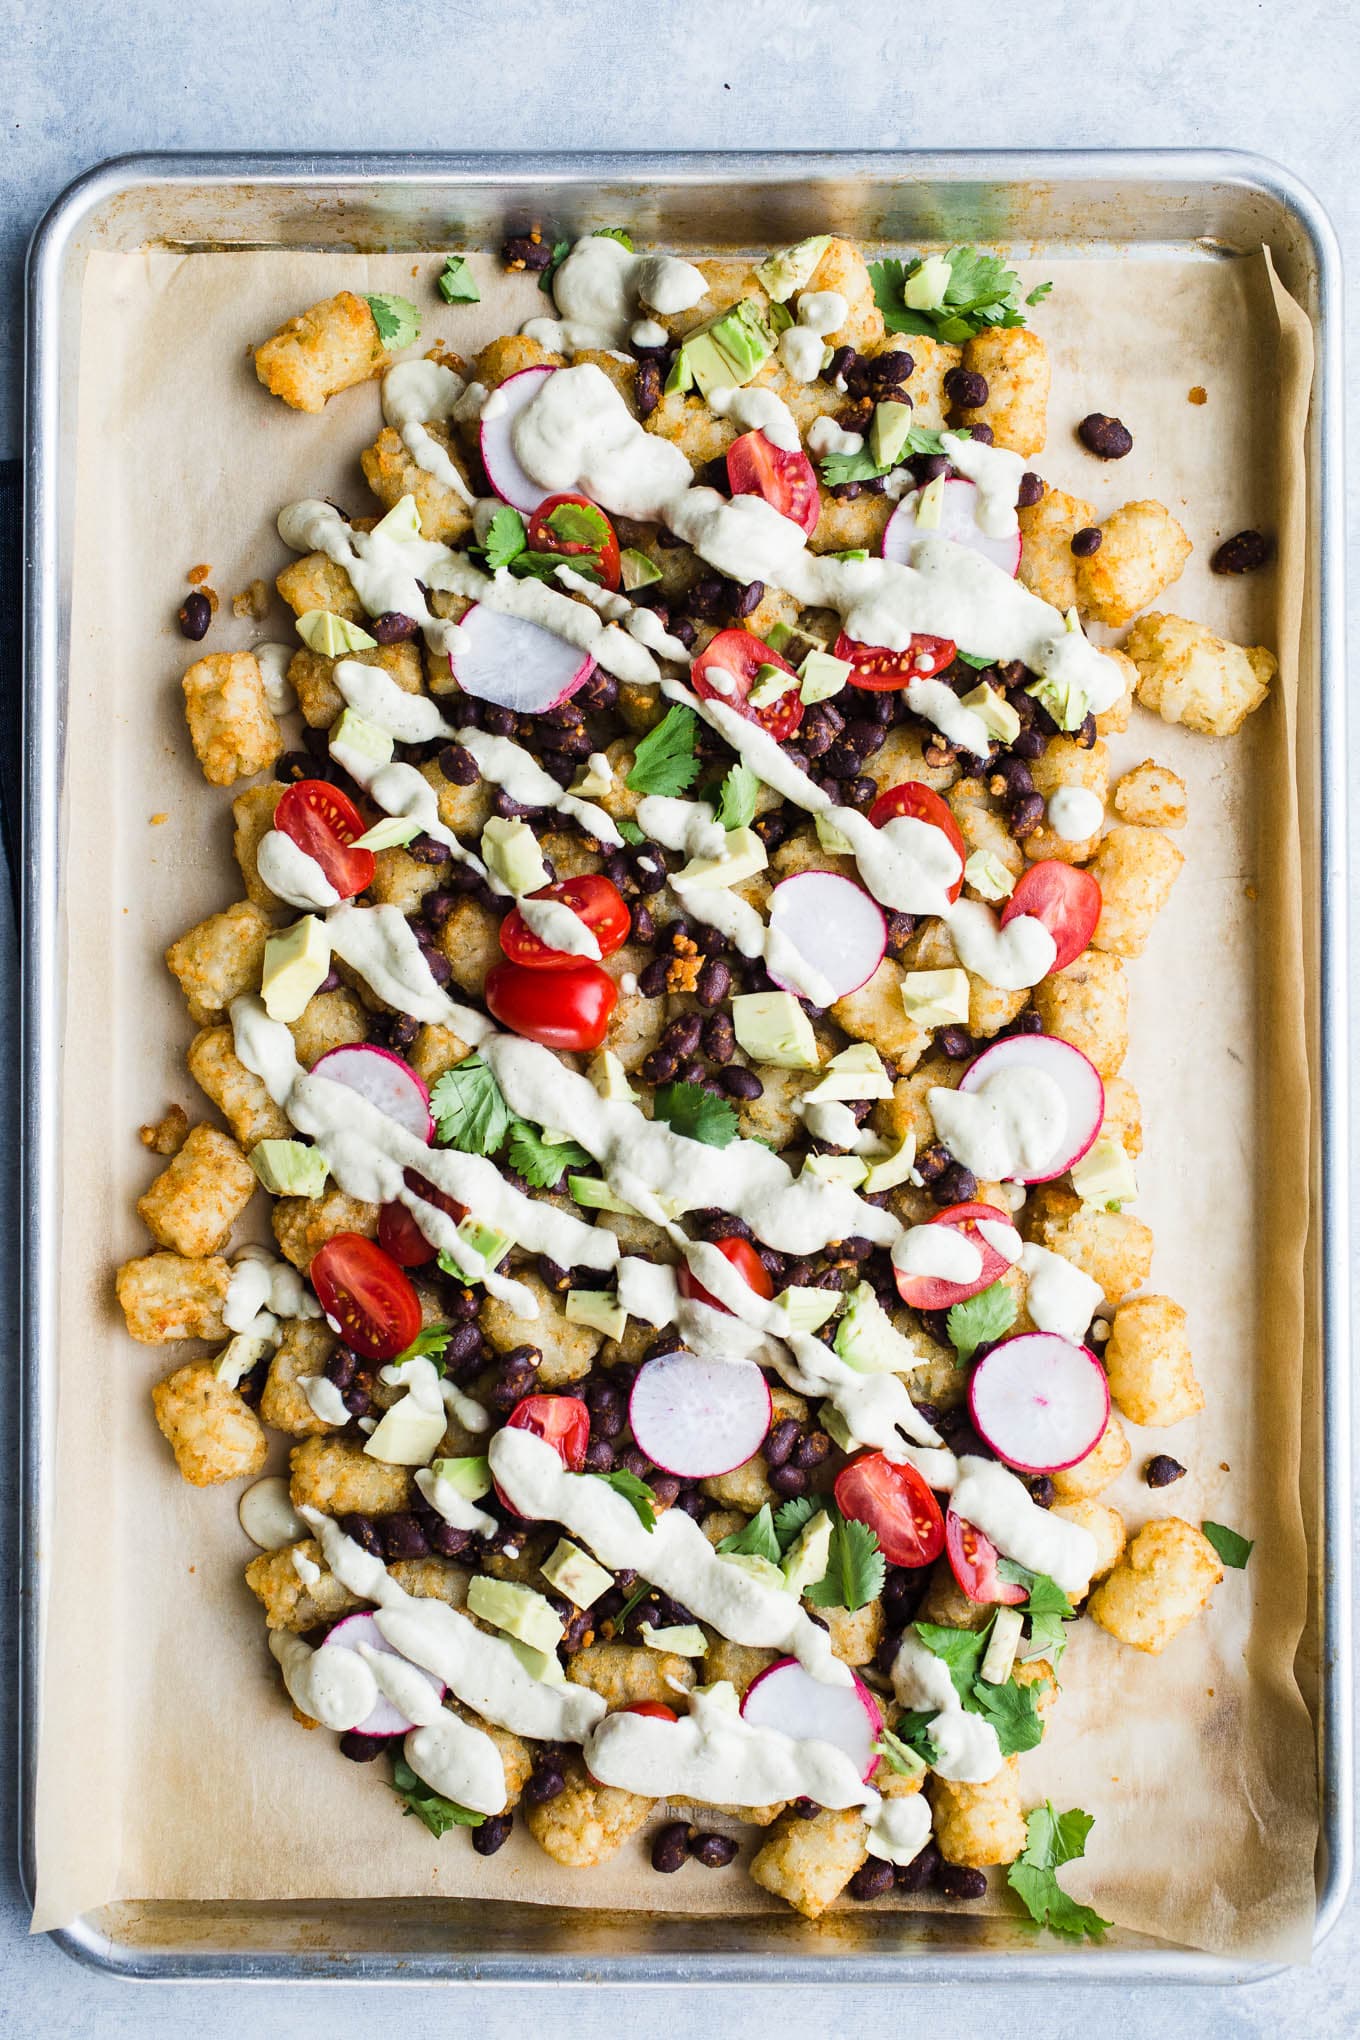 Vegan Salsa Verde Totchos made with a green salsa cashew cheese sauce and loaded with vegetarian toppings. A gluten-free tater tot nachos recipe!